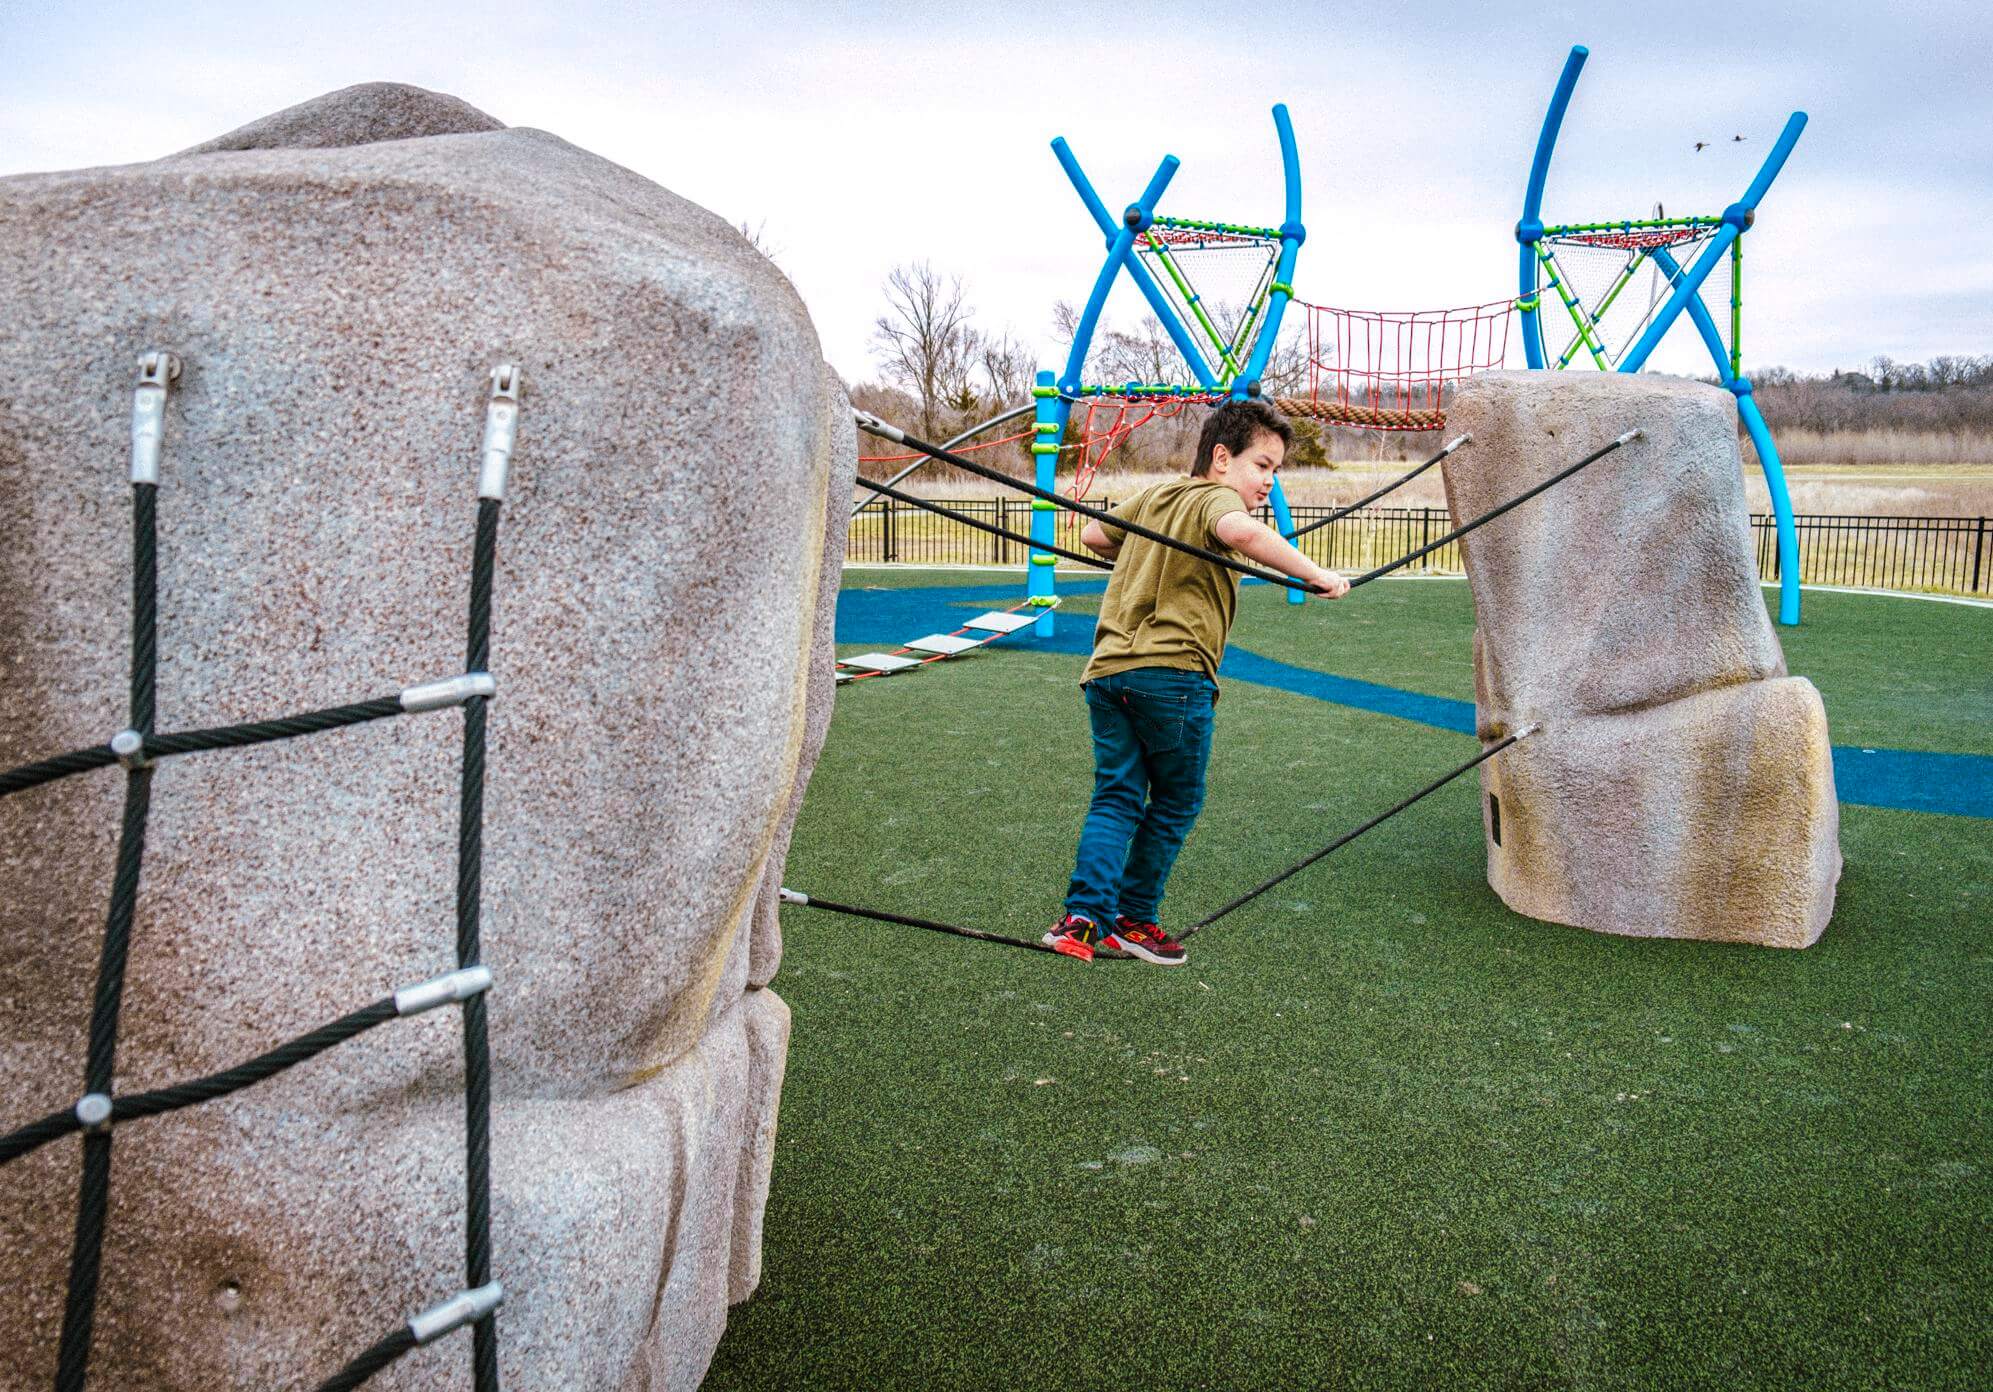 A child engaging with a rope feature connected to sculpted boulders, with complex climbing structures in the background.